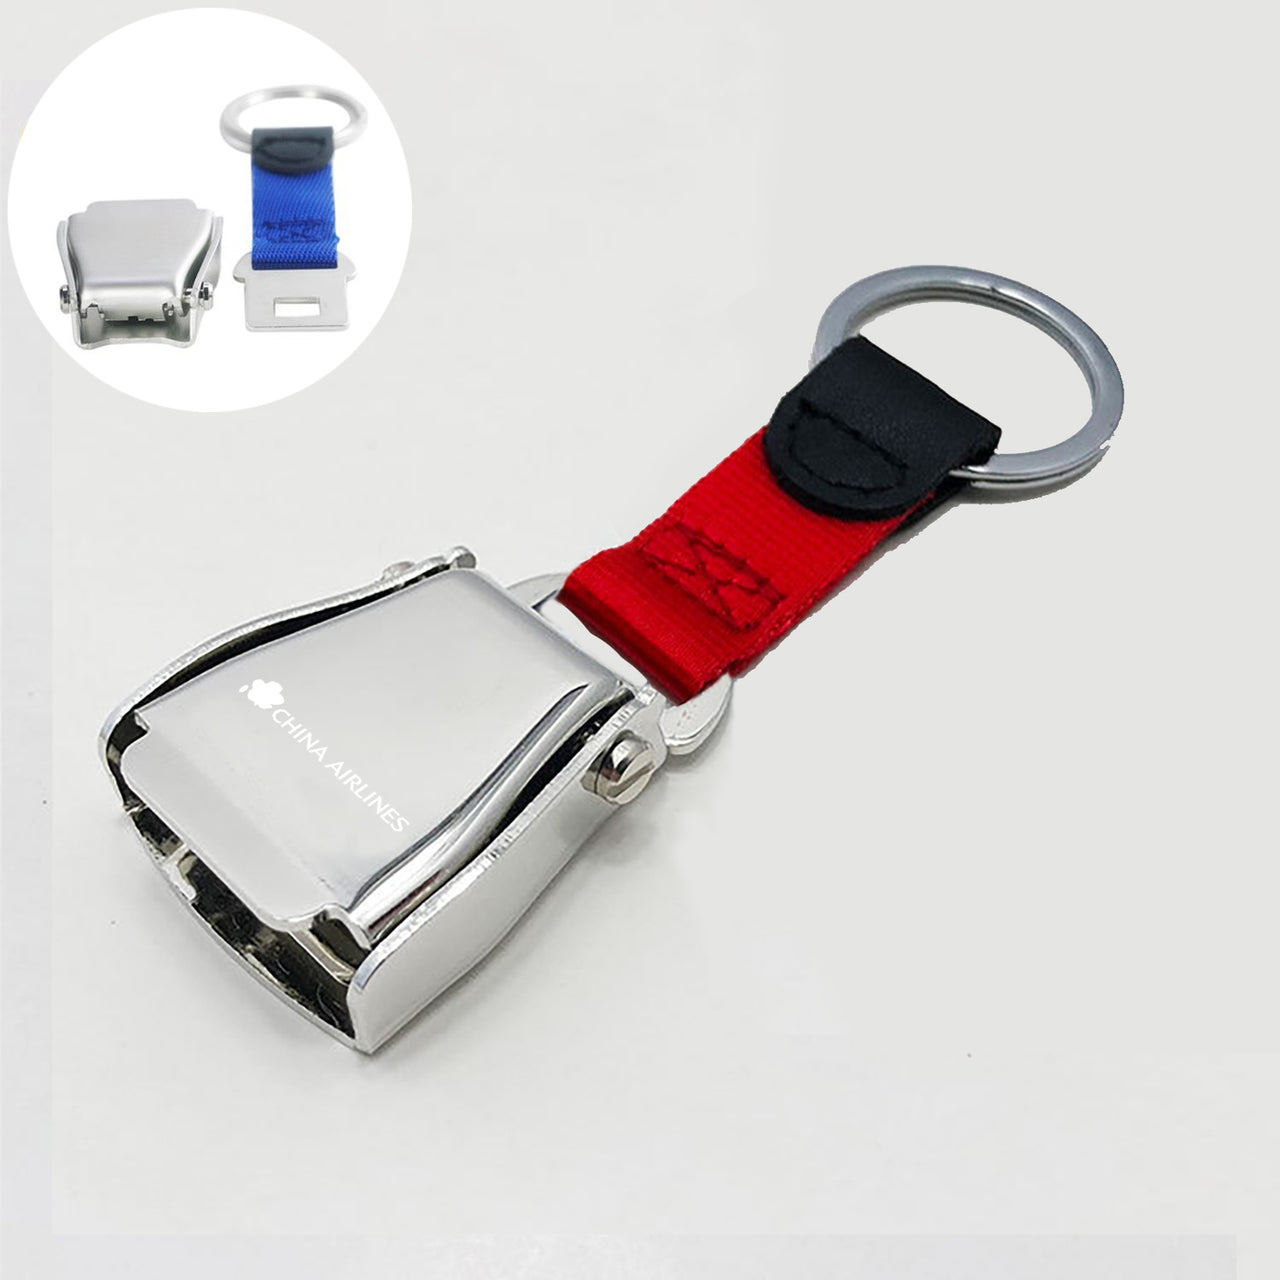 China Airlines Designed Airplane Seat Belt Key Chains